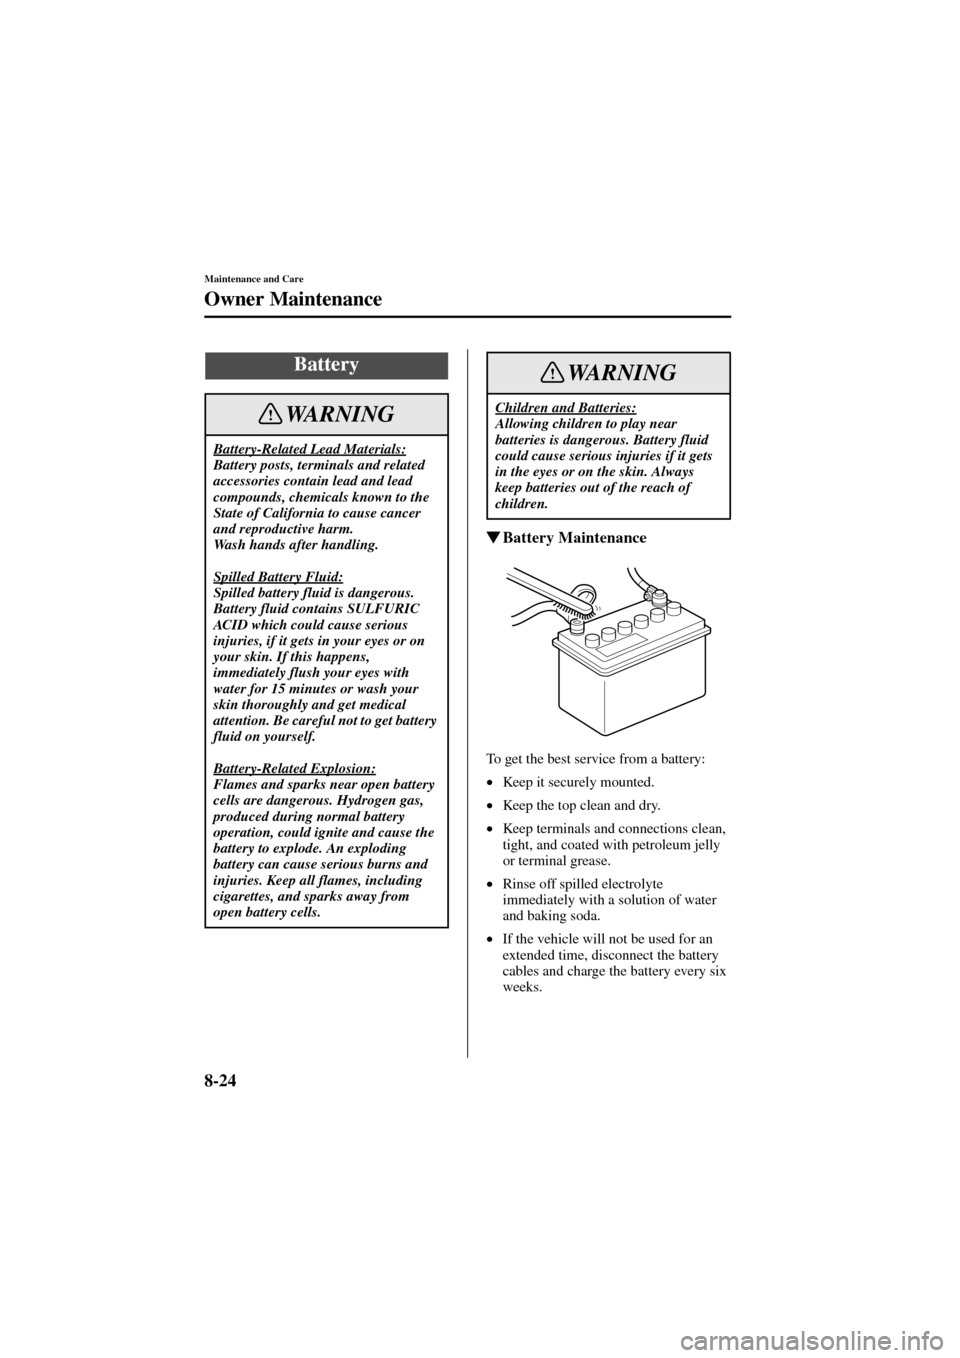 MAZDA MODEL 6 2004   (in English) Owners Guide 8-24
Maintenance and Care
Owner Maintenance
Form No. 8R29-EA-02I
Battery Maintenance
To get the best service from a battery:
•
Keep it securely mounted.
•
Keep the top clean and dry.
•
Keep ter